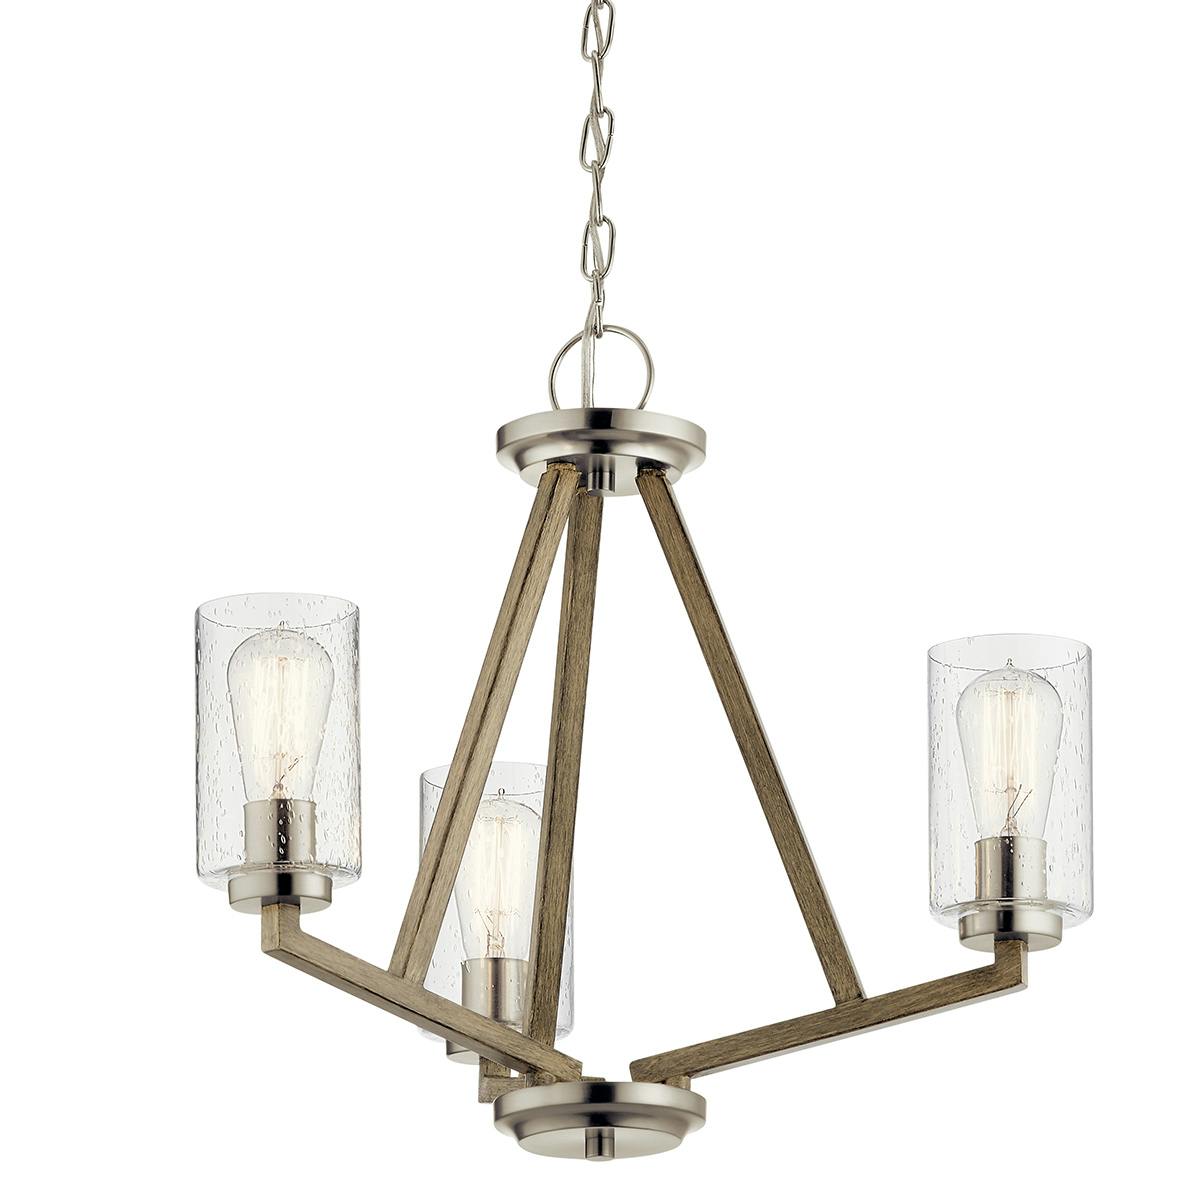 Close up view of the Deryn 3 Light Pendant Antique Grey on a white background